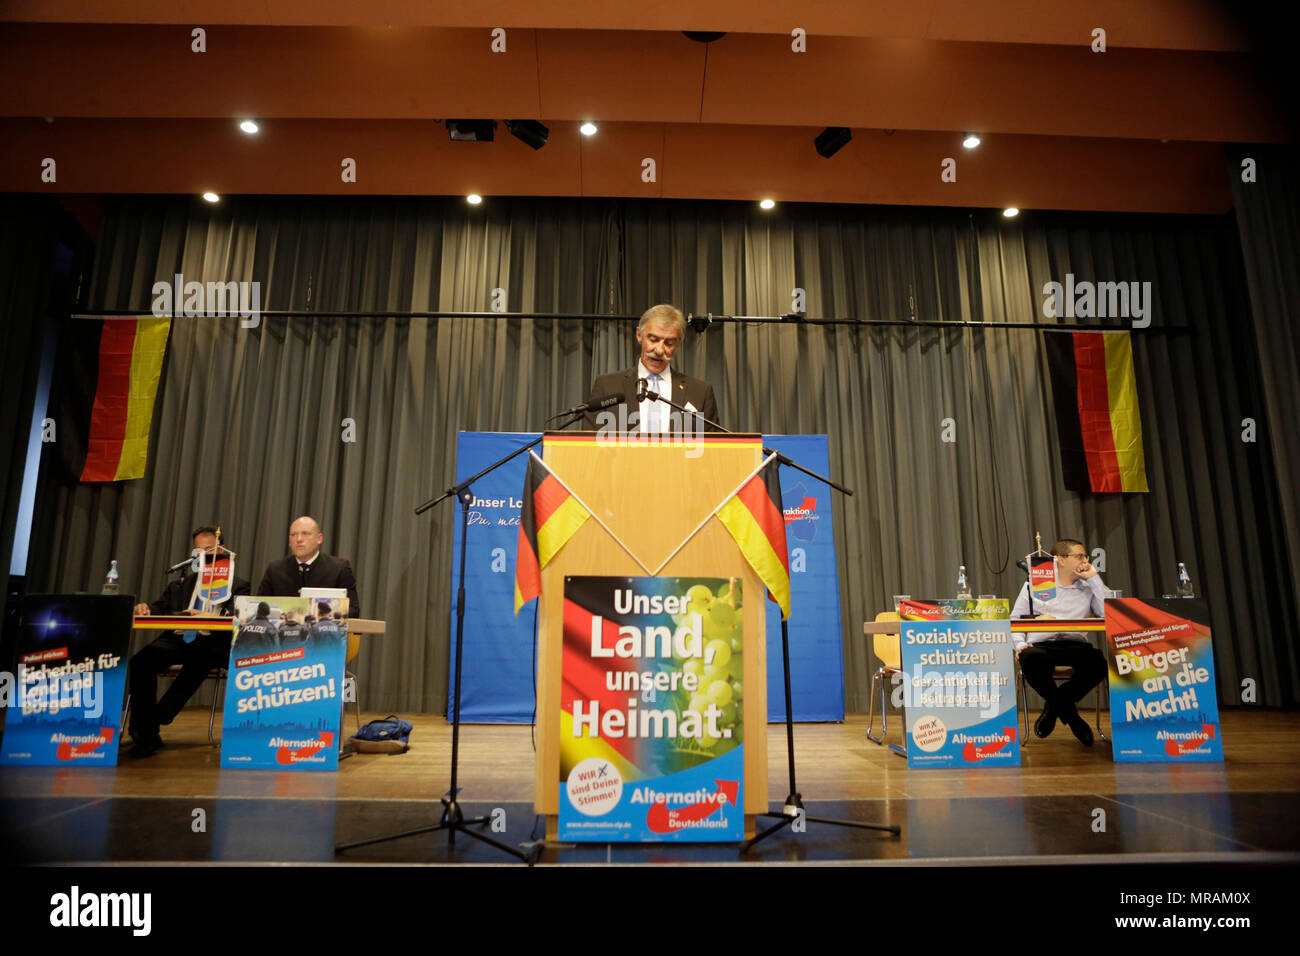 Jockgrim, Germany. 26th May 2018. The parliamentary leader of the AfD party in the Landtag (parliament) of Rhineland-Palatinate Uwe Junge speaks on the podium. The parliamentary group of the right-wing populist AfD (Alternative for Germany) party of Rhineland-Palatinate celebrated the 2nd anniversary of their entry into the Rhineland-Palatinate state parliament in the 2016 state election in the South Palatinate city of Jockgrim. A counter-protest was organised by several groups outside the venue. Credit: Michael Debets/Alamy Live News Stock Photo